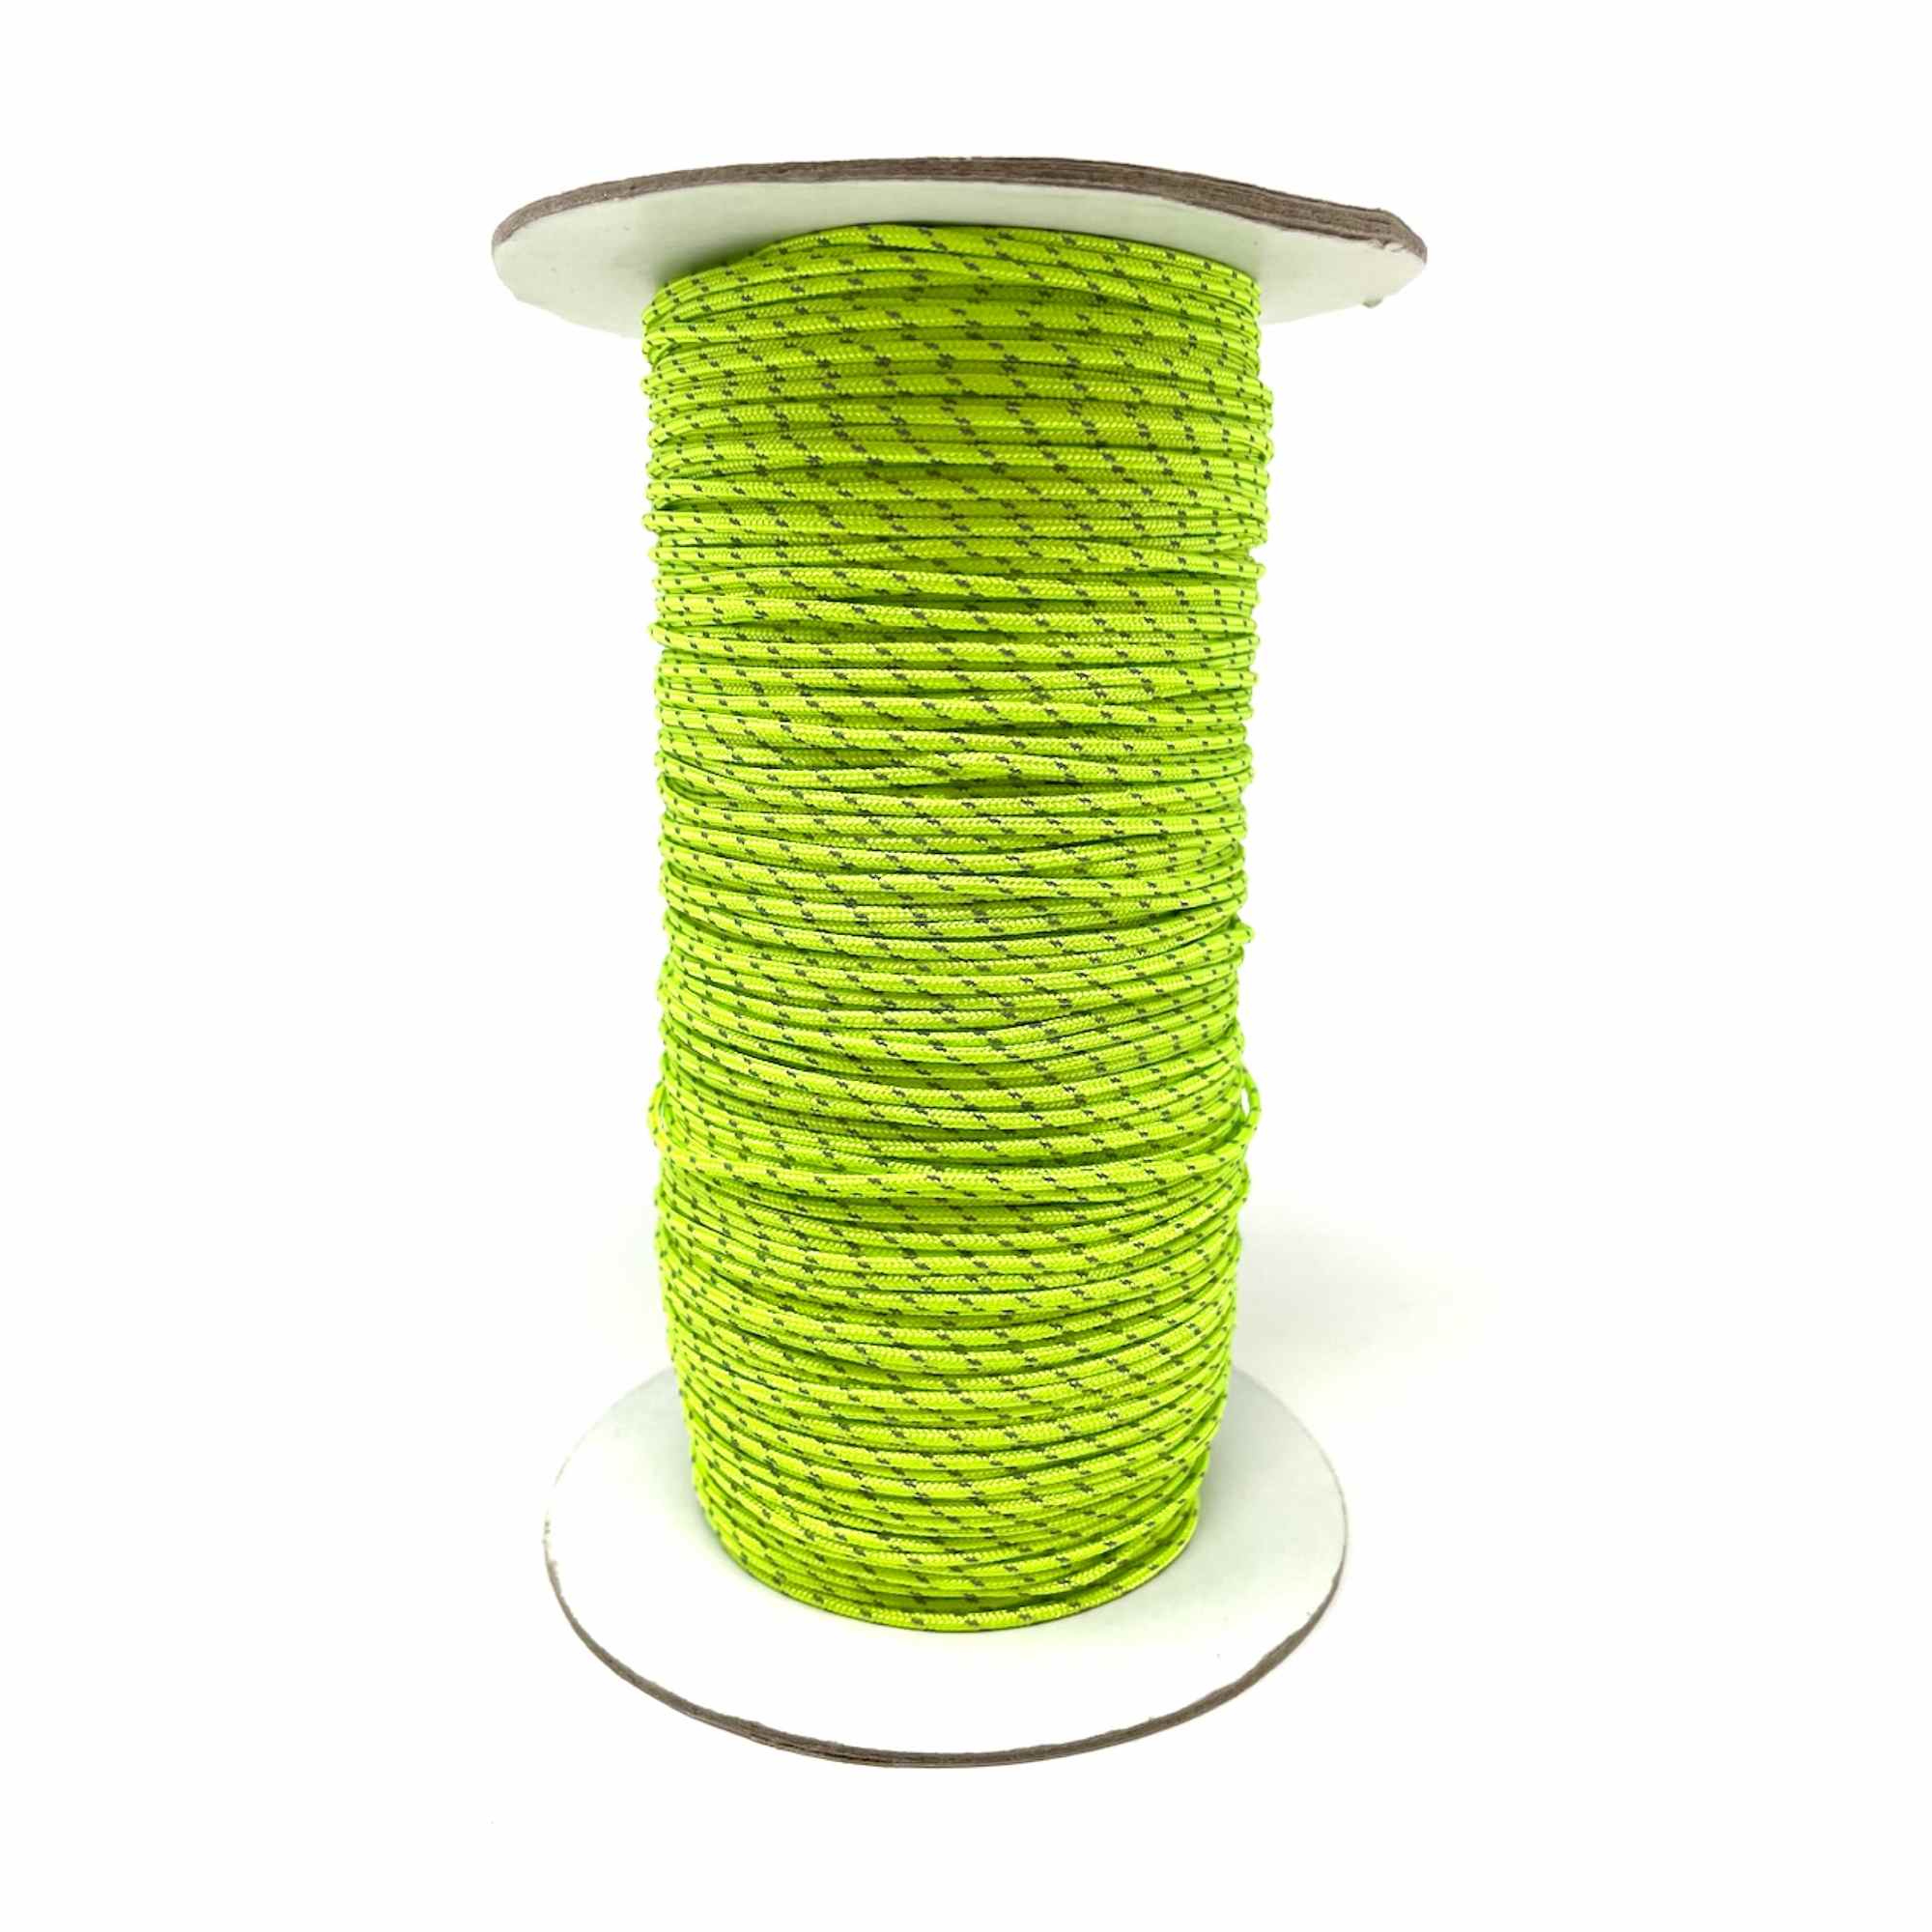 1.5 mm Poly/UHMWPE Reflective Cord - Full Spools